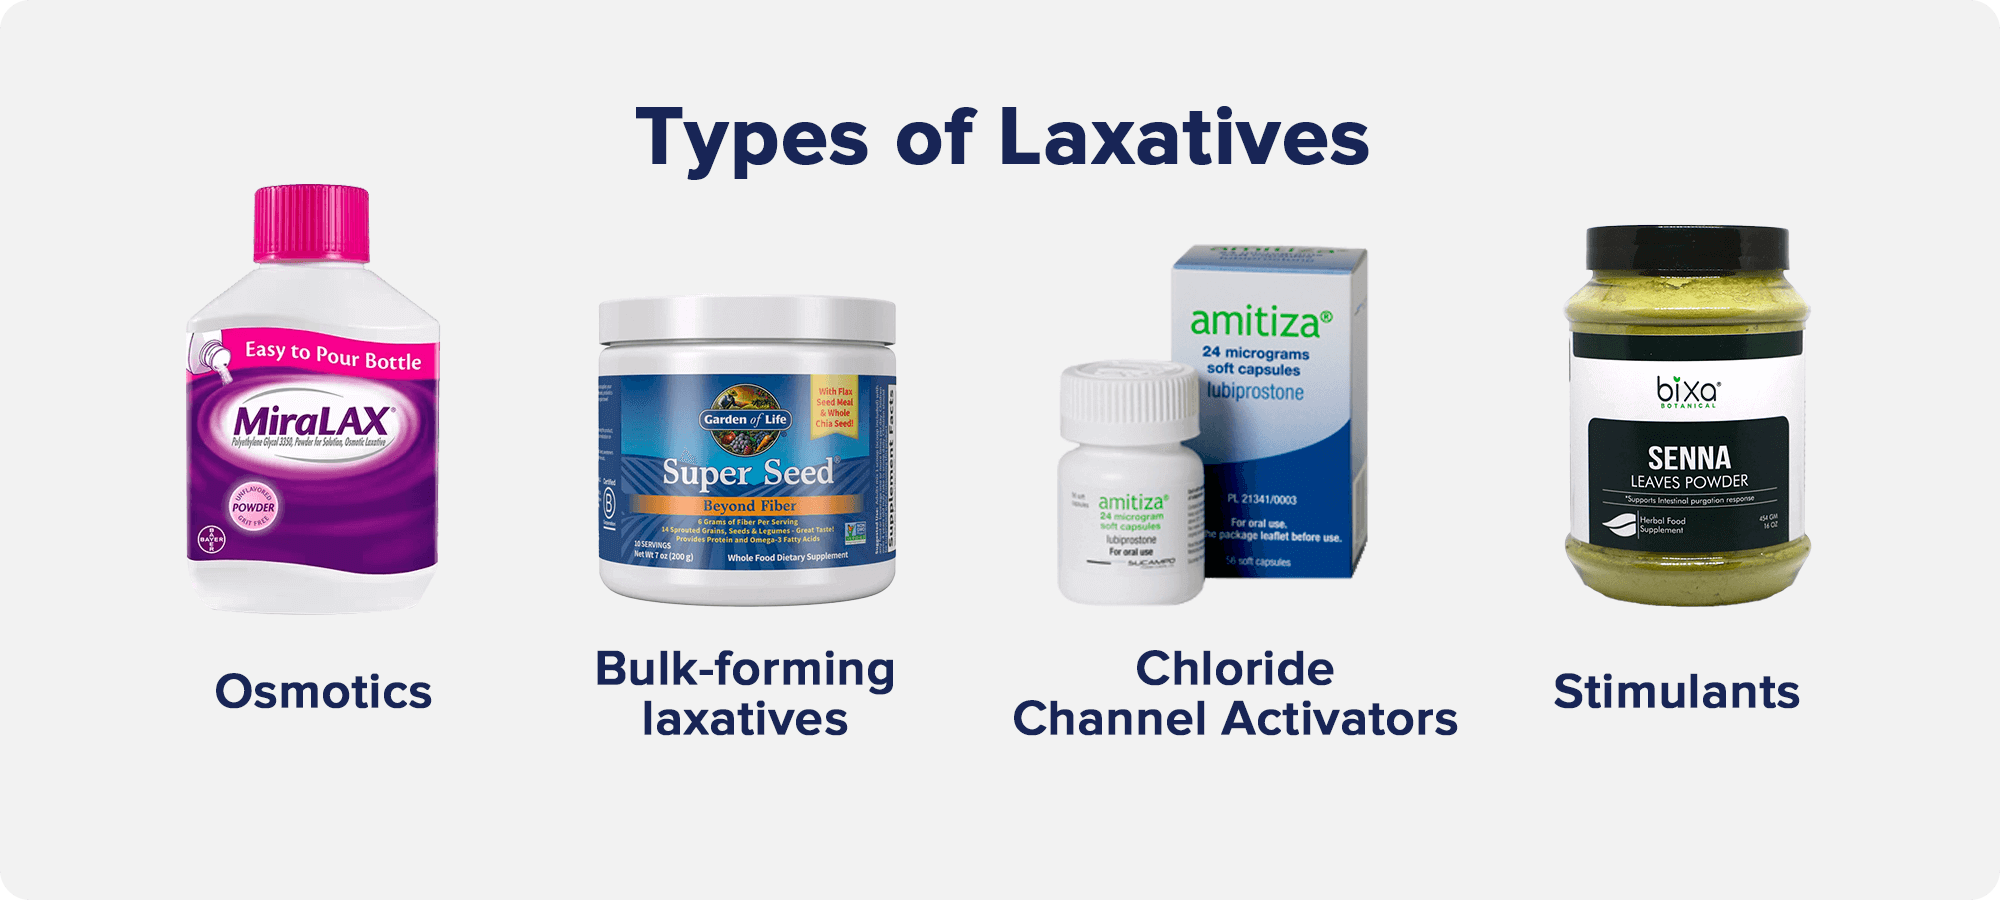 Types of Laxatives